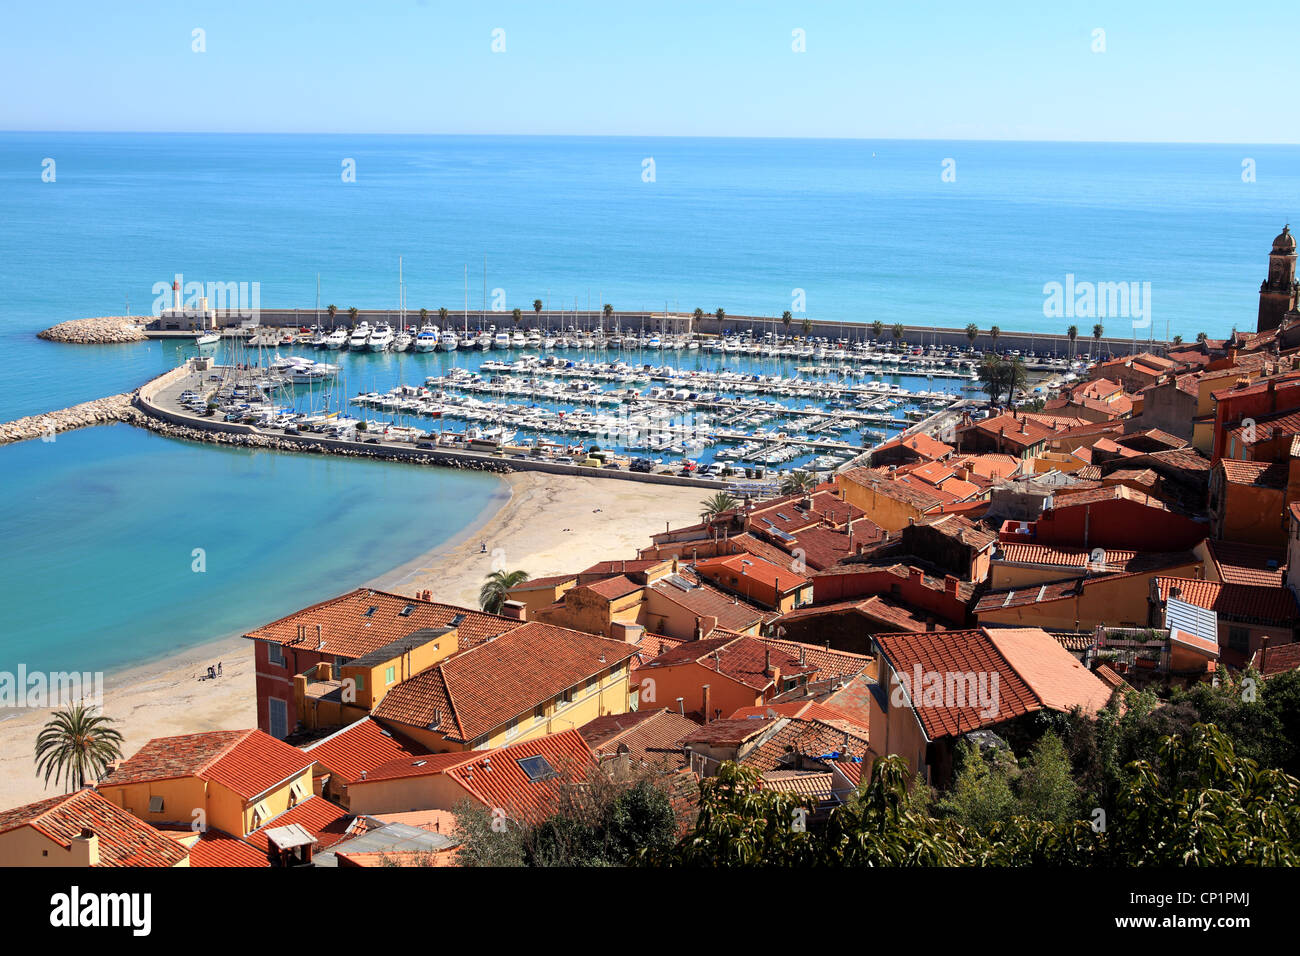 Overview of the coastal city of Menton on the French Riviera Stock Photo